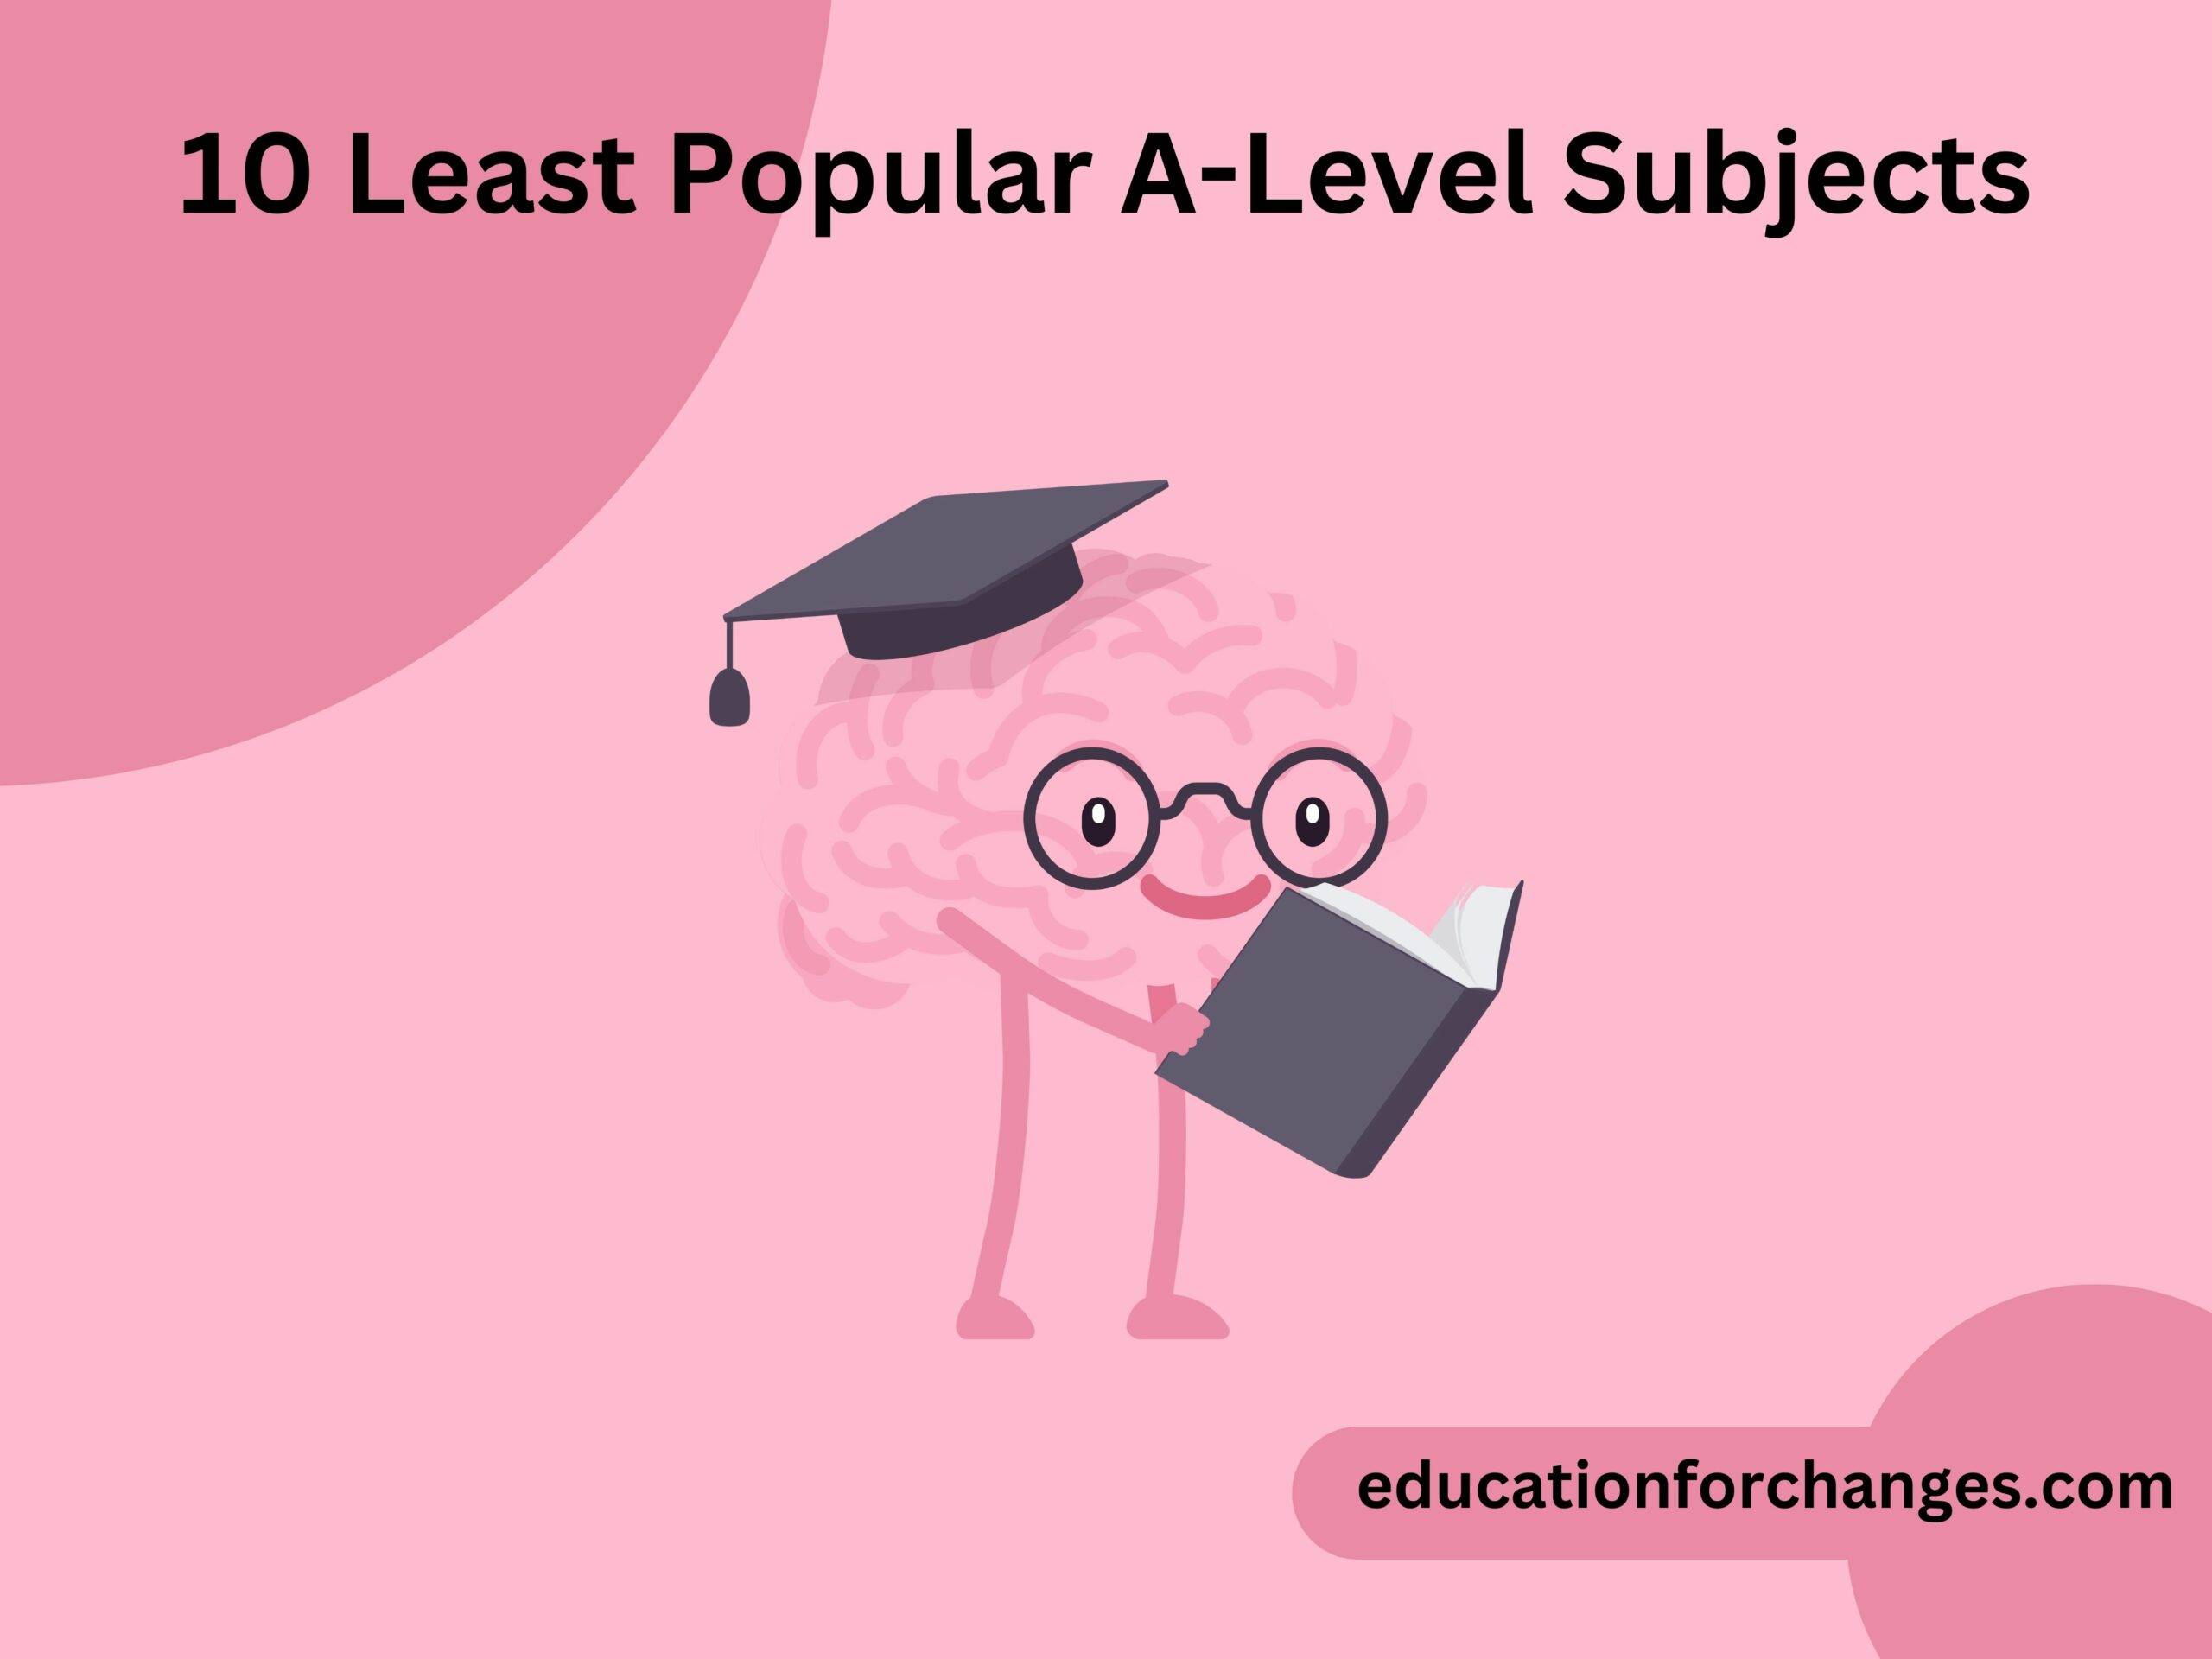 10 Least Popular A-Level Subjects